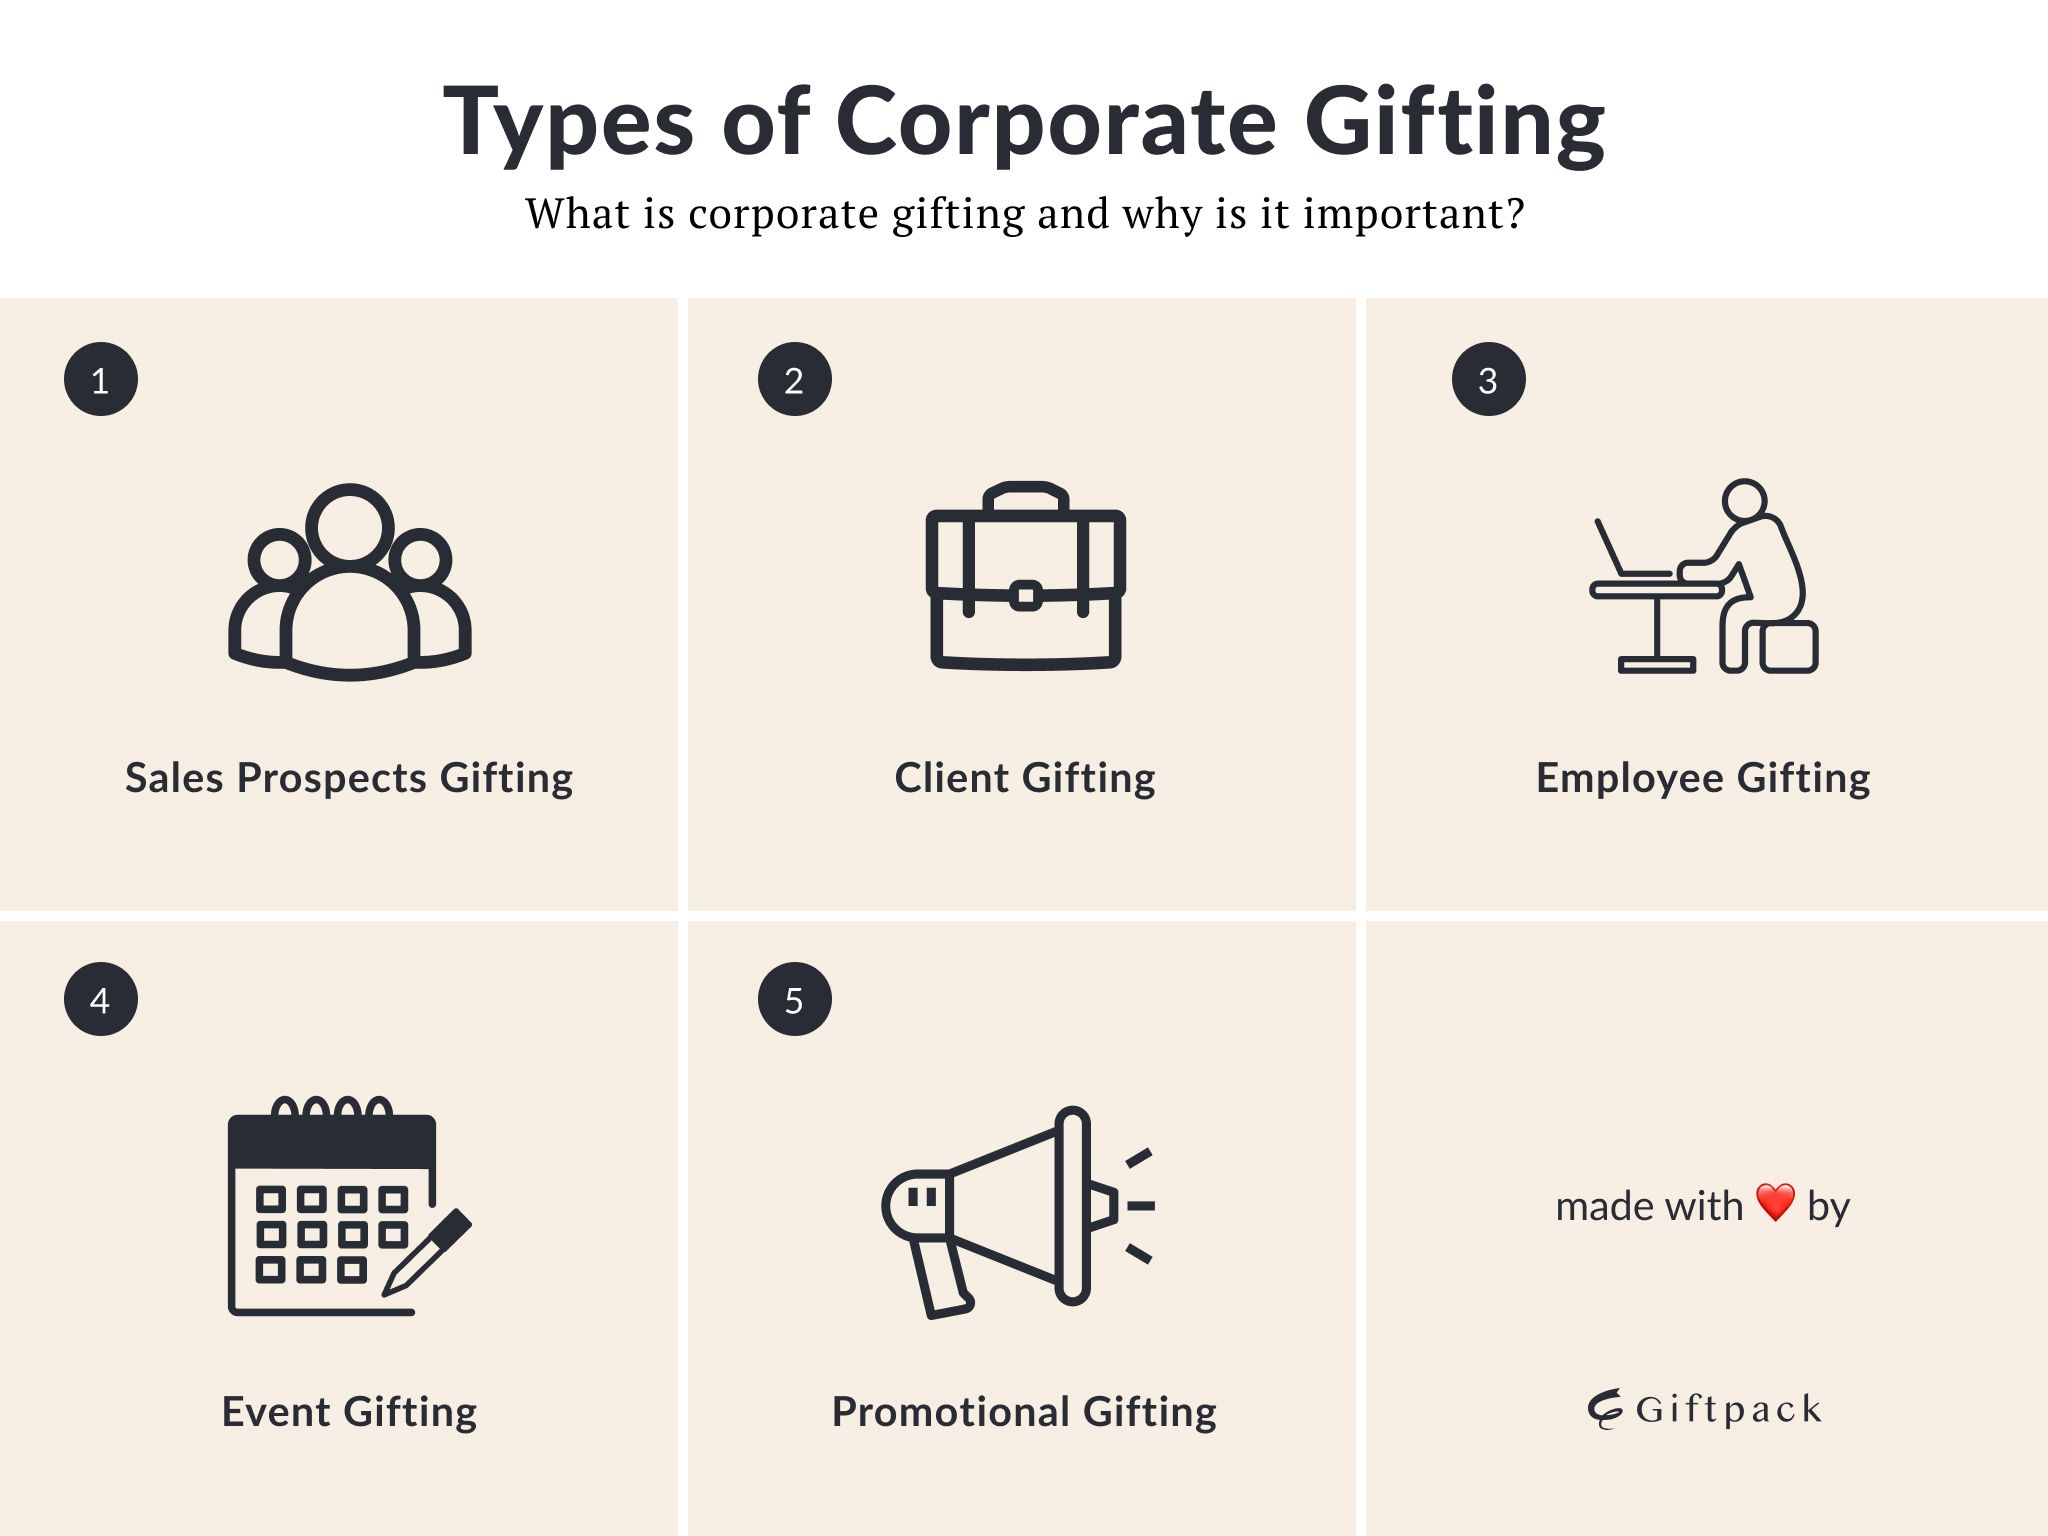 5 types of corporate gifting